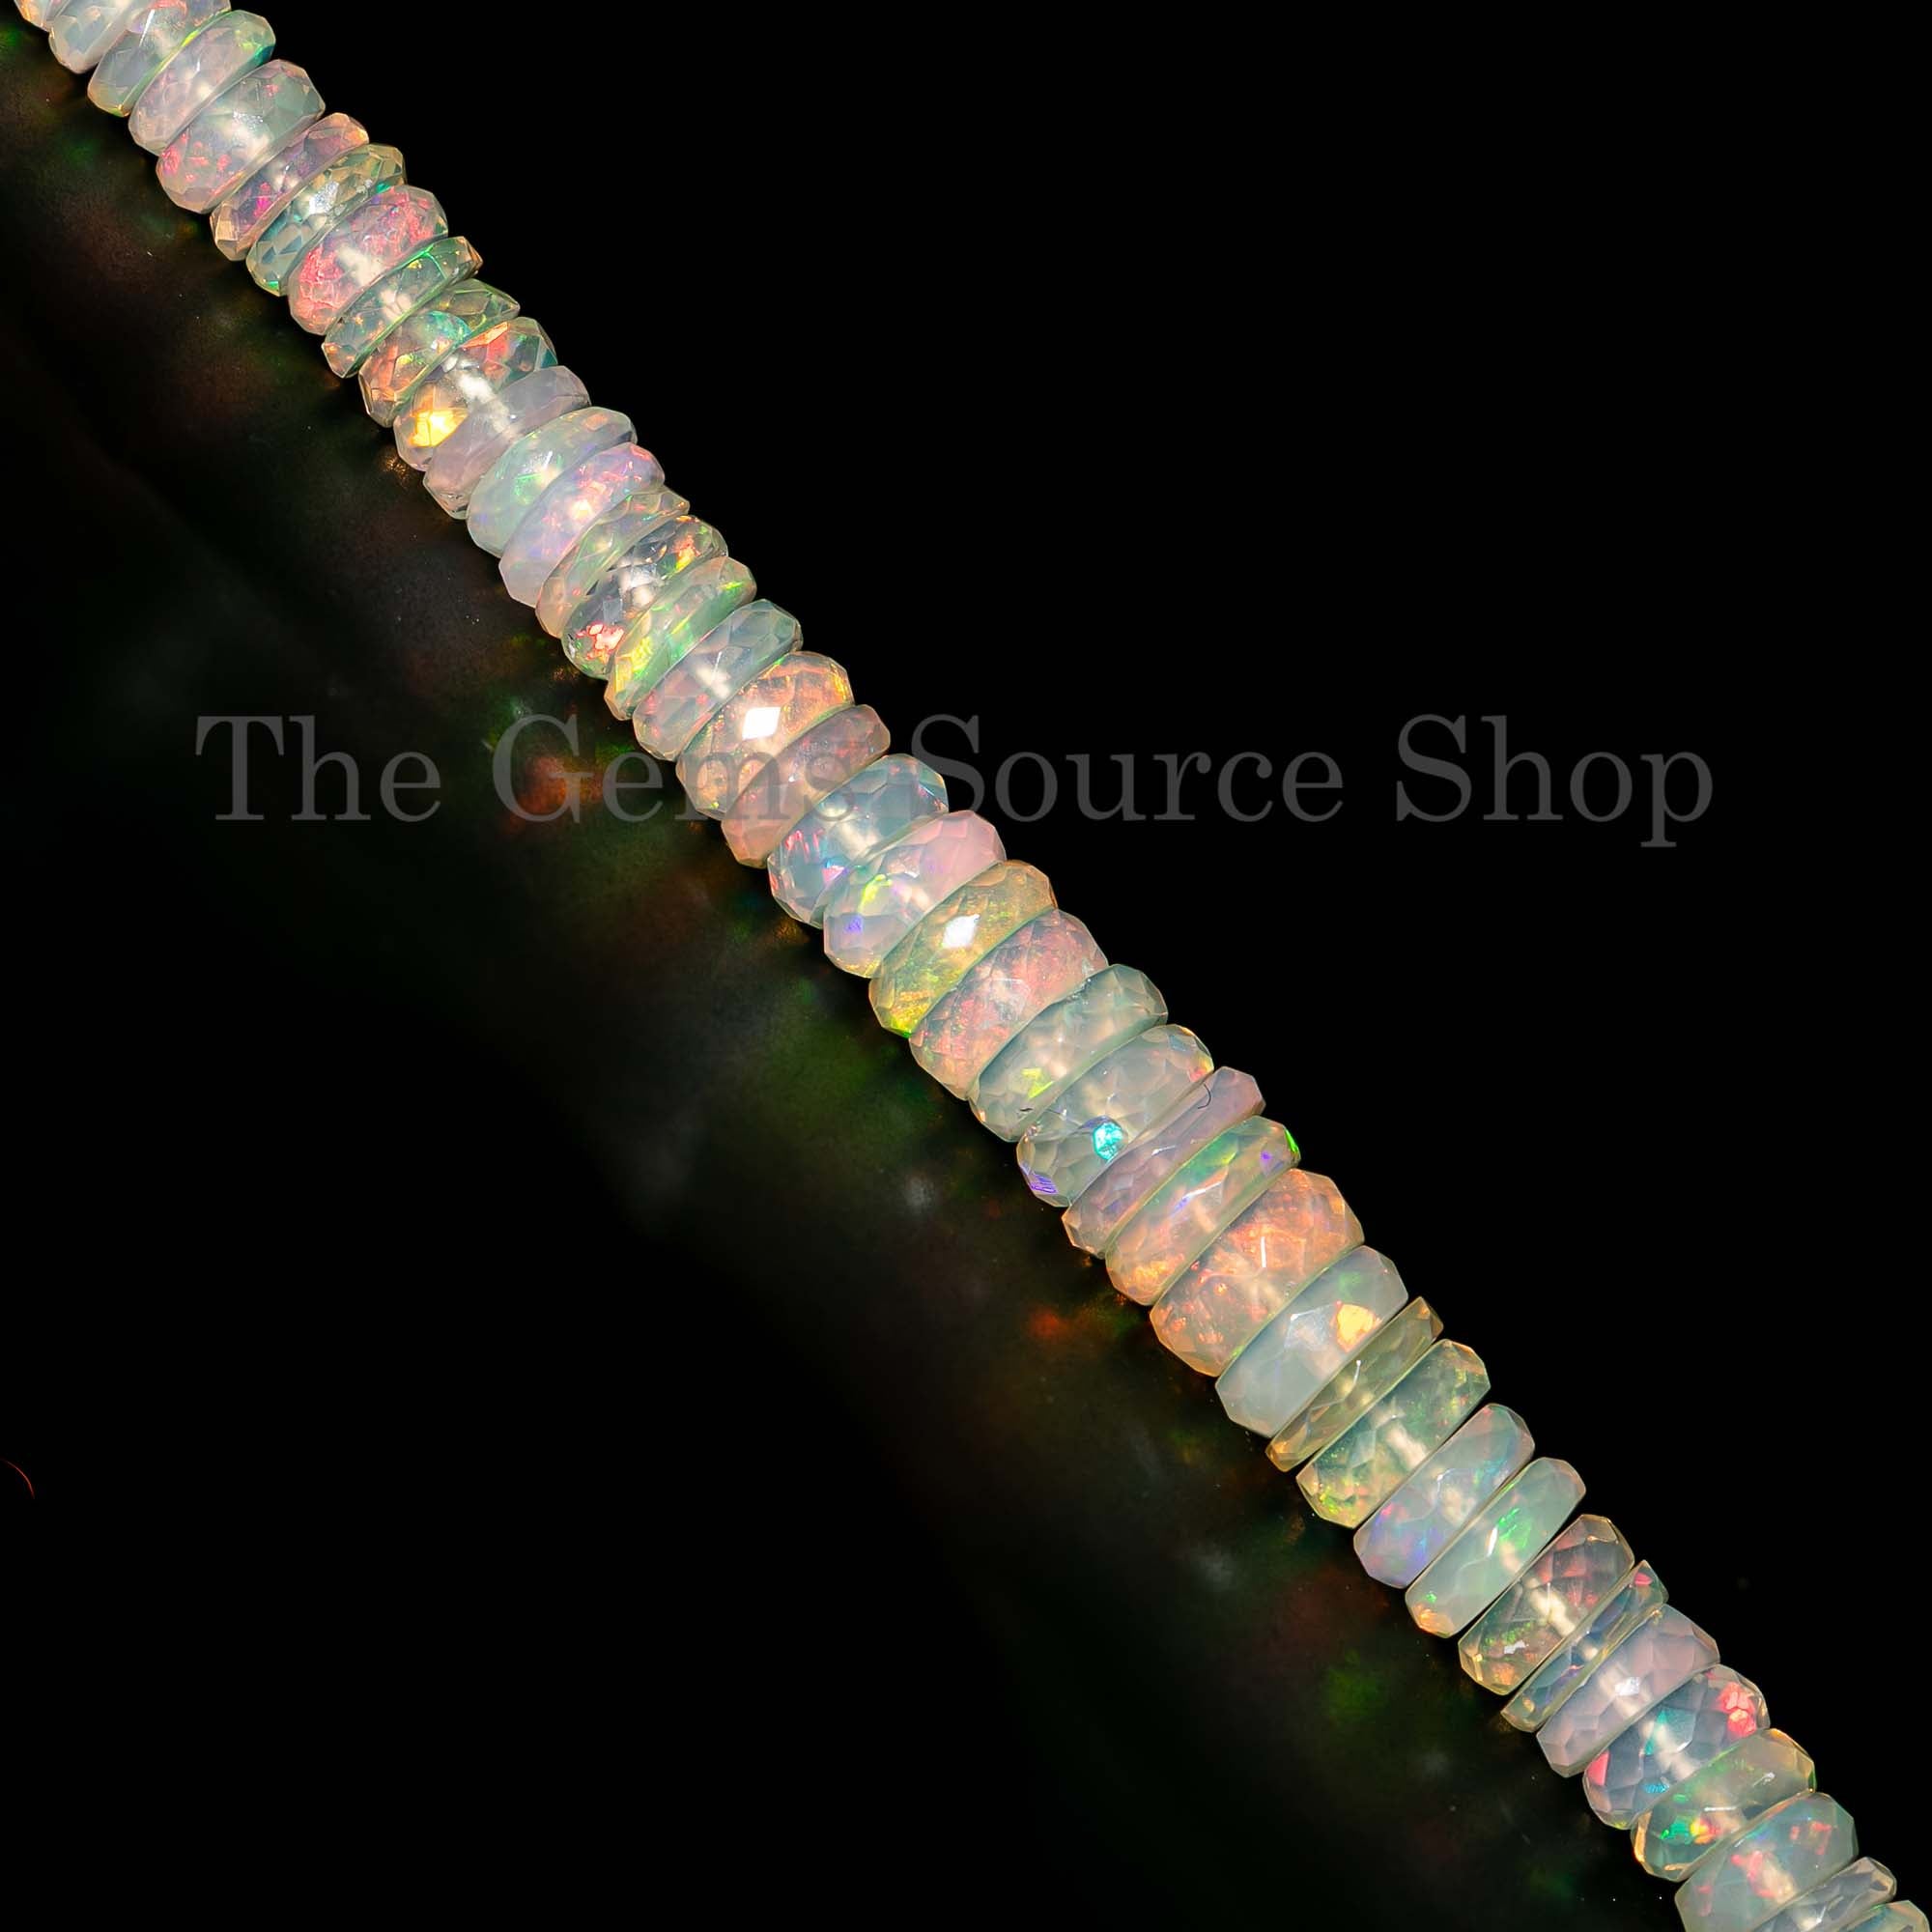 Natural Ethiopian Opal Beads, Opal Faceted Beads, Ethiopian Opal Tyre Shape Beads, Wholesale Beads